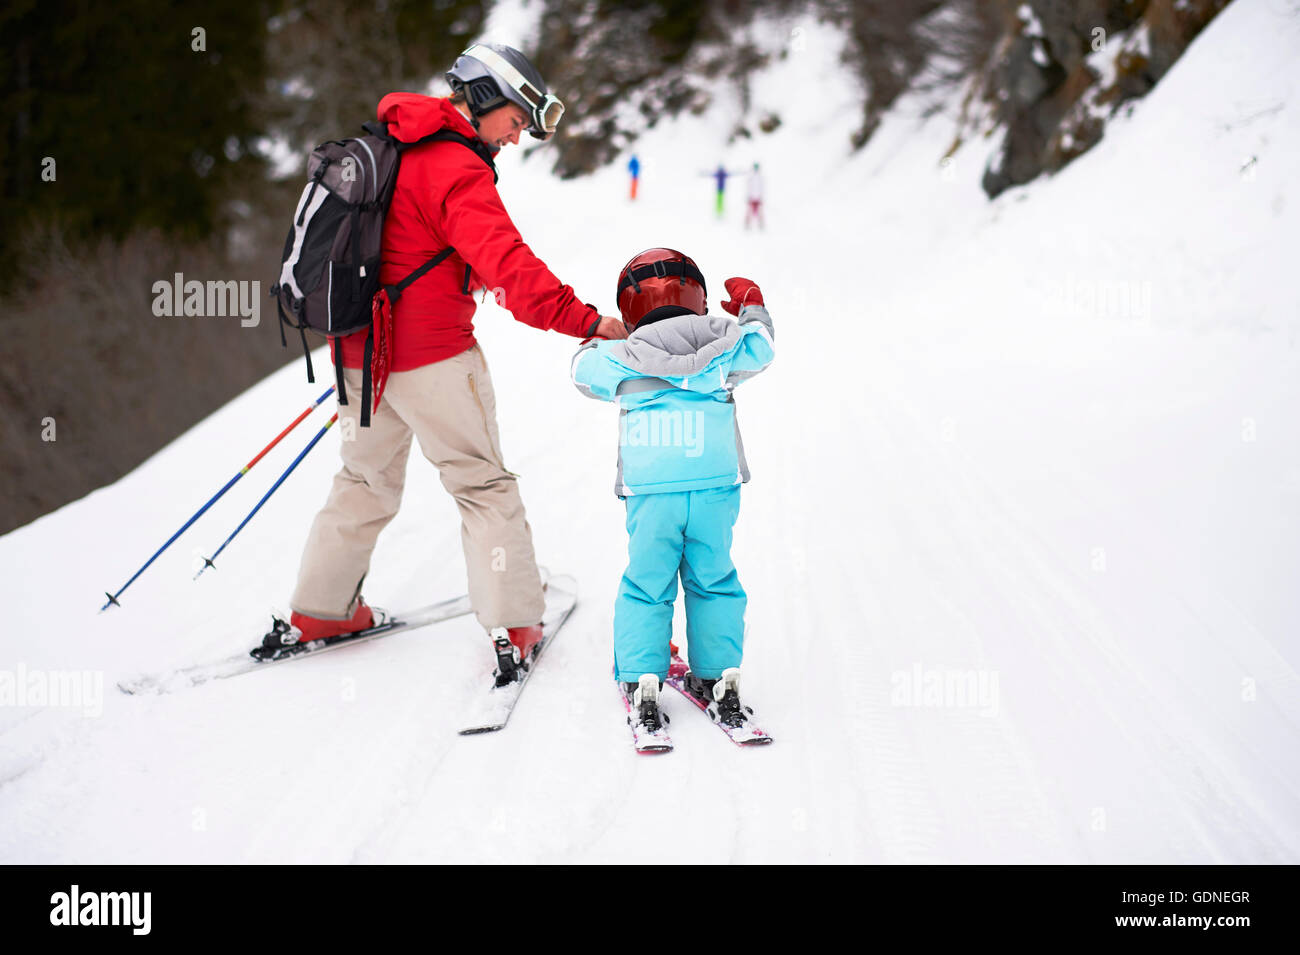 Mother and son on skis, rear view Stock Photo